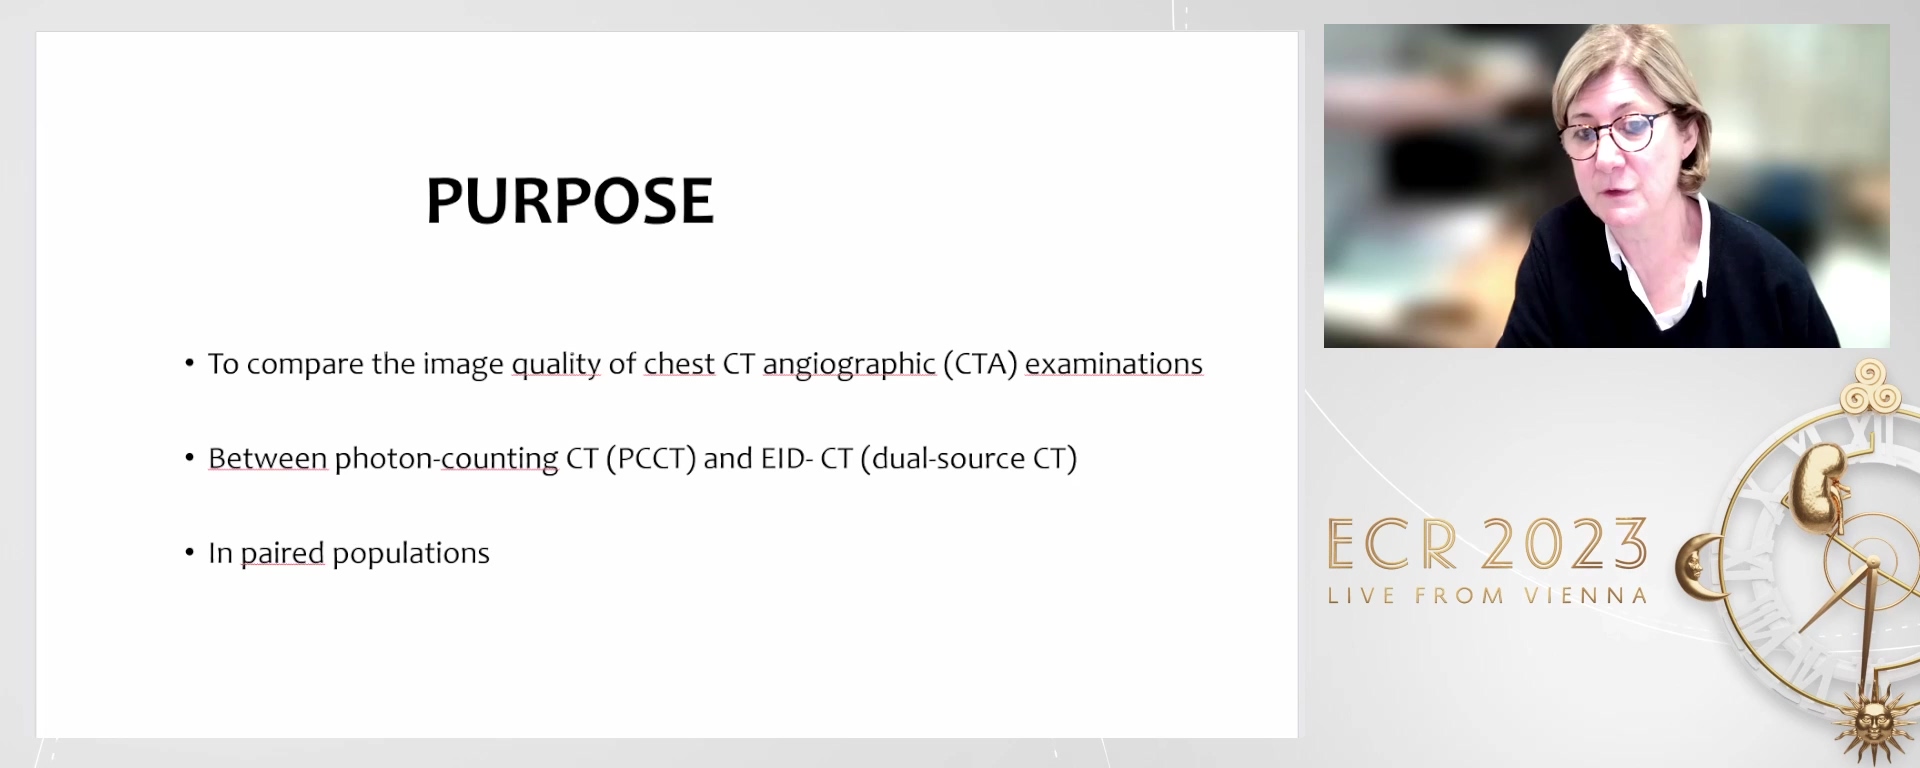 Chest CT angiography in daily practice with a photon-counting CT equipment: comparison of image quality with energy-integrating-detector (EID) CT in 142 patients - Martine Rémy-Jardin, Lille / FR